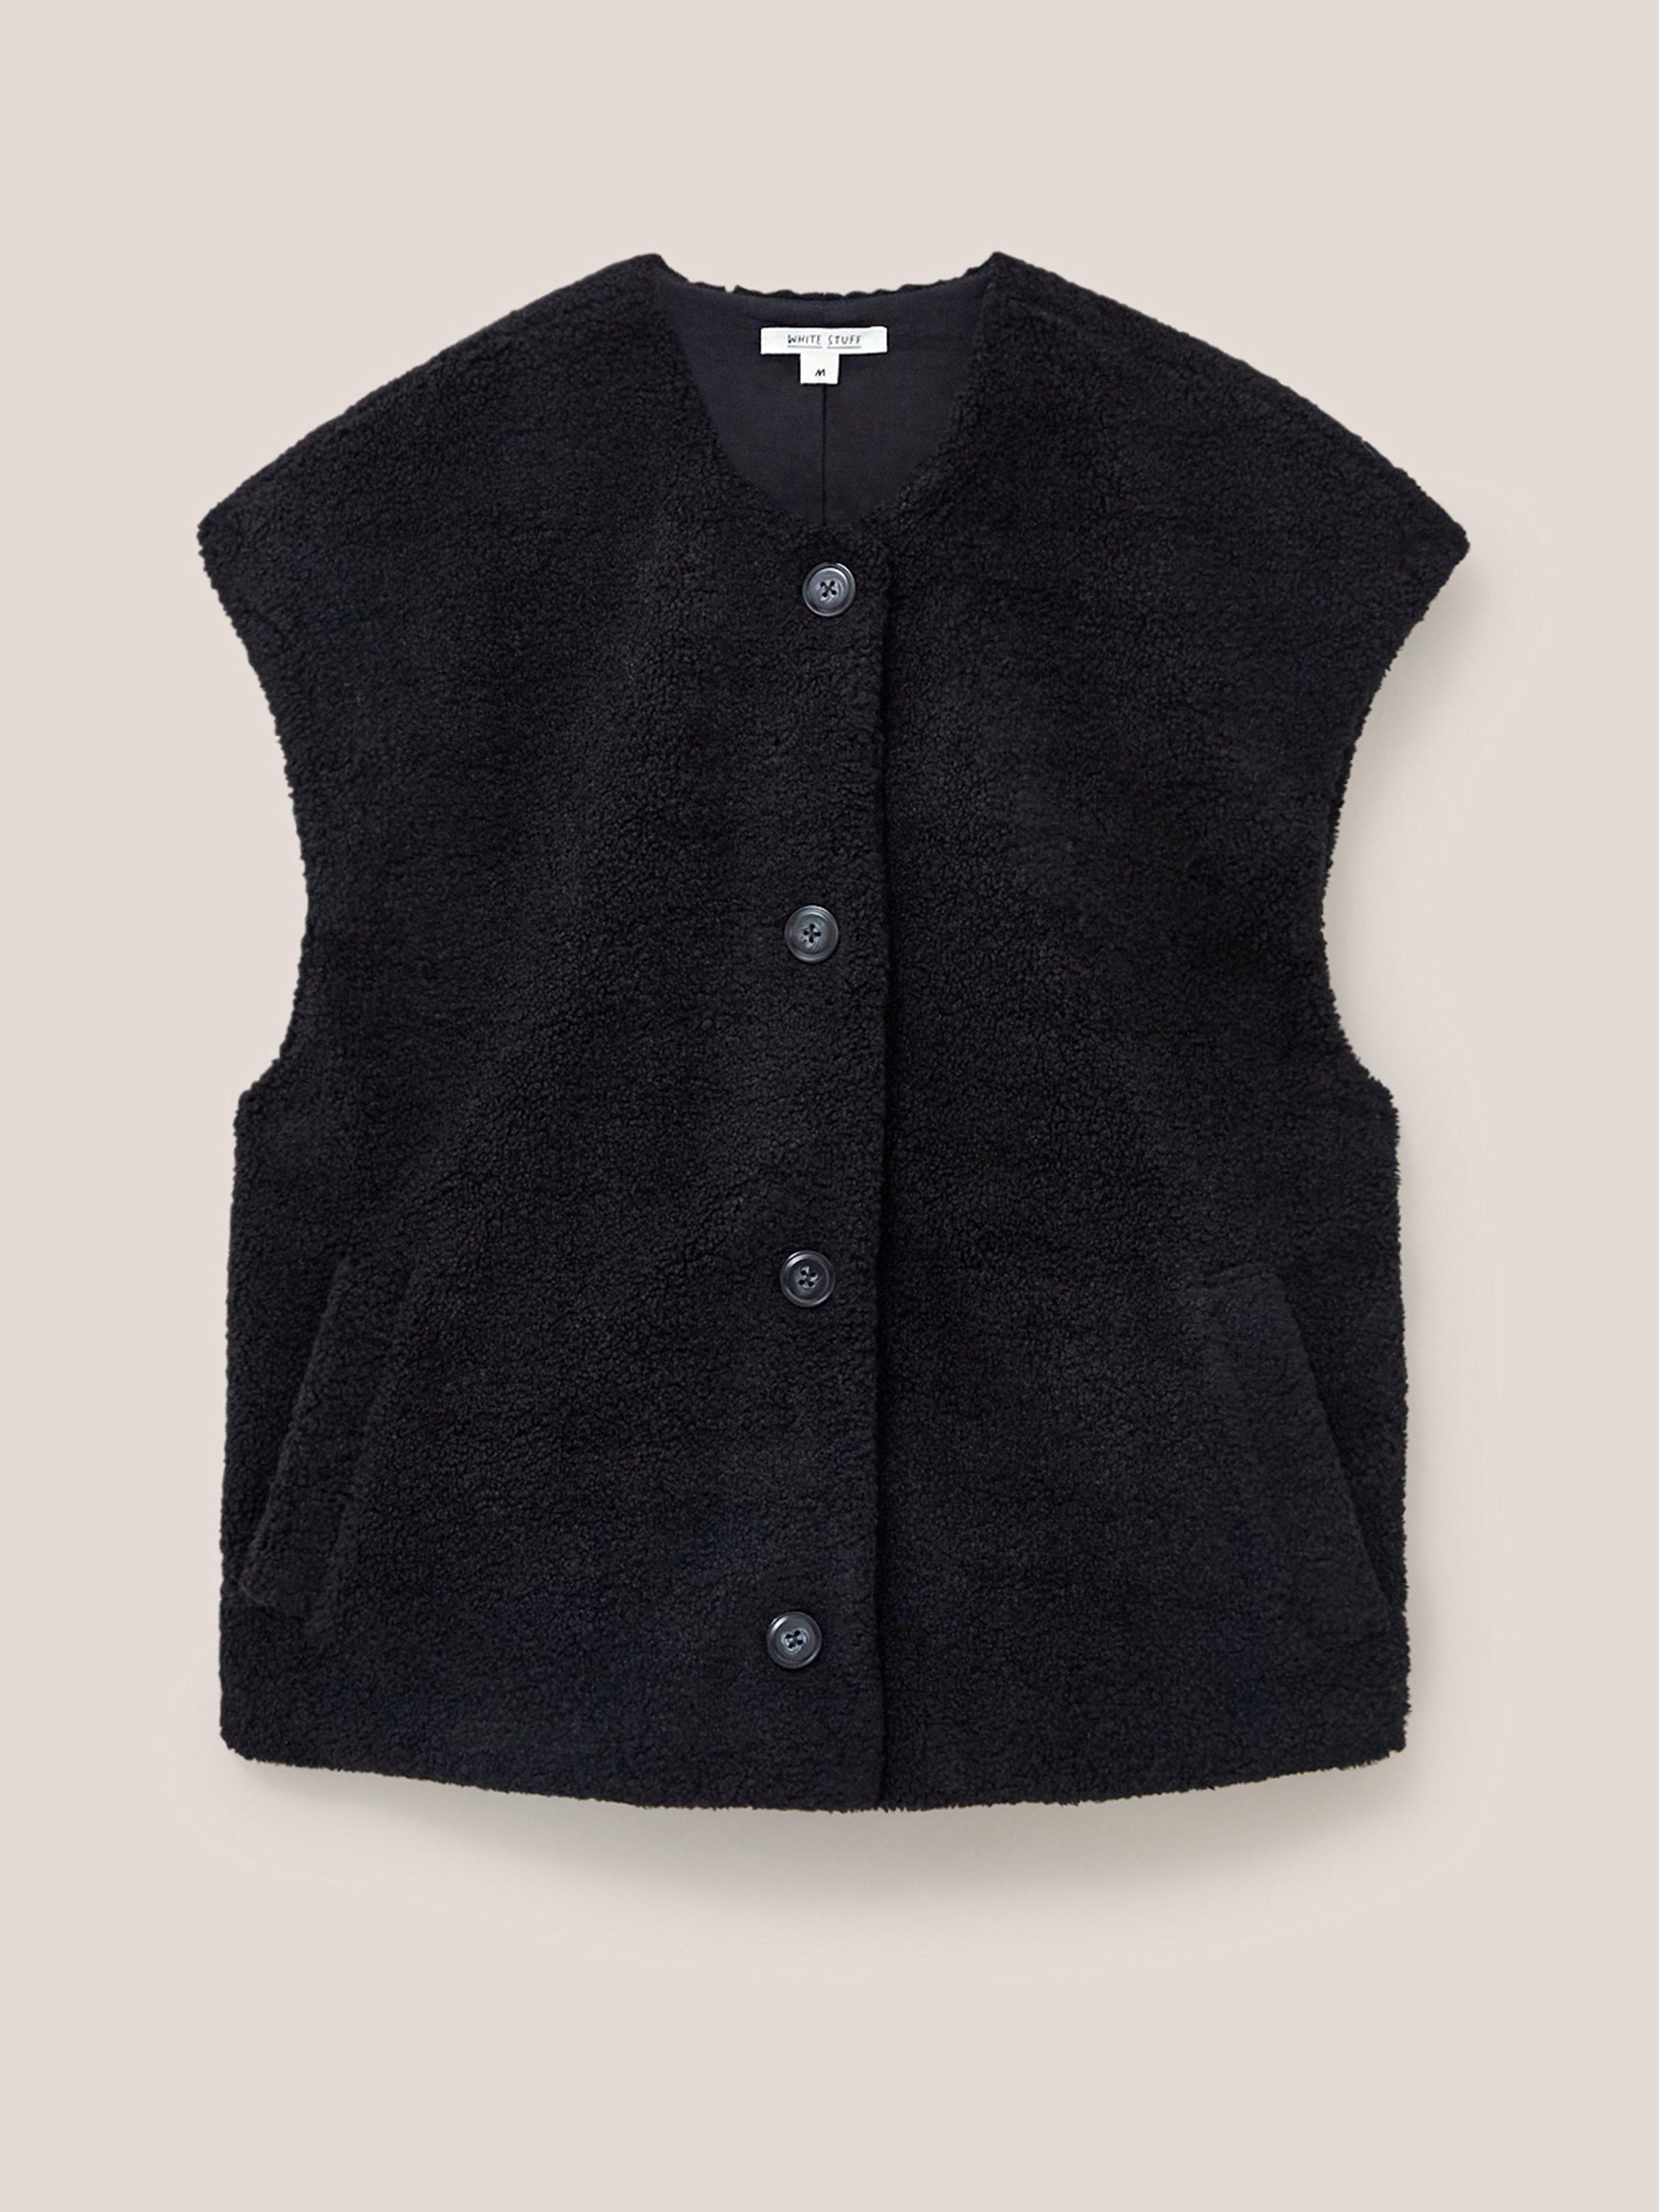 Borg Gilet in PURE BLK - FLAT FRONT